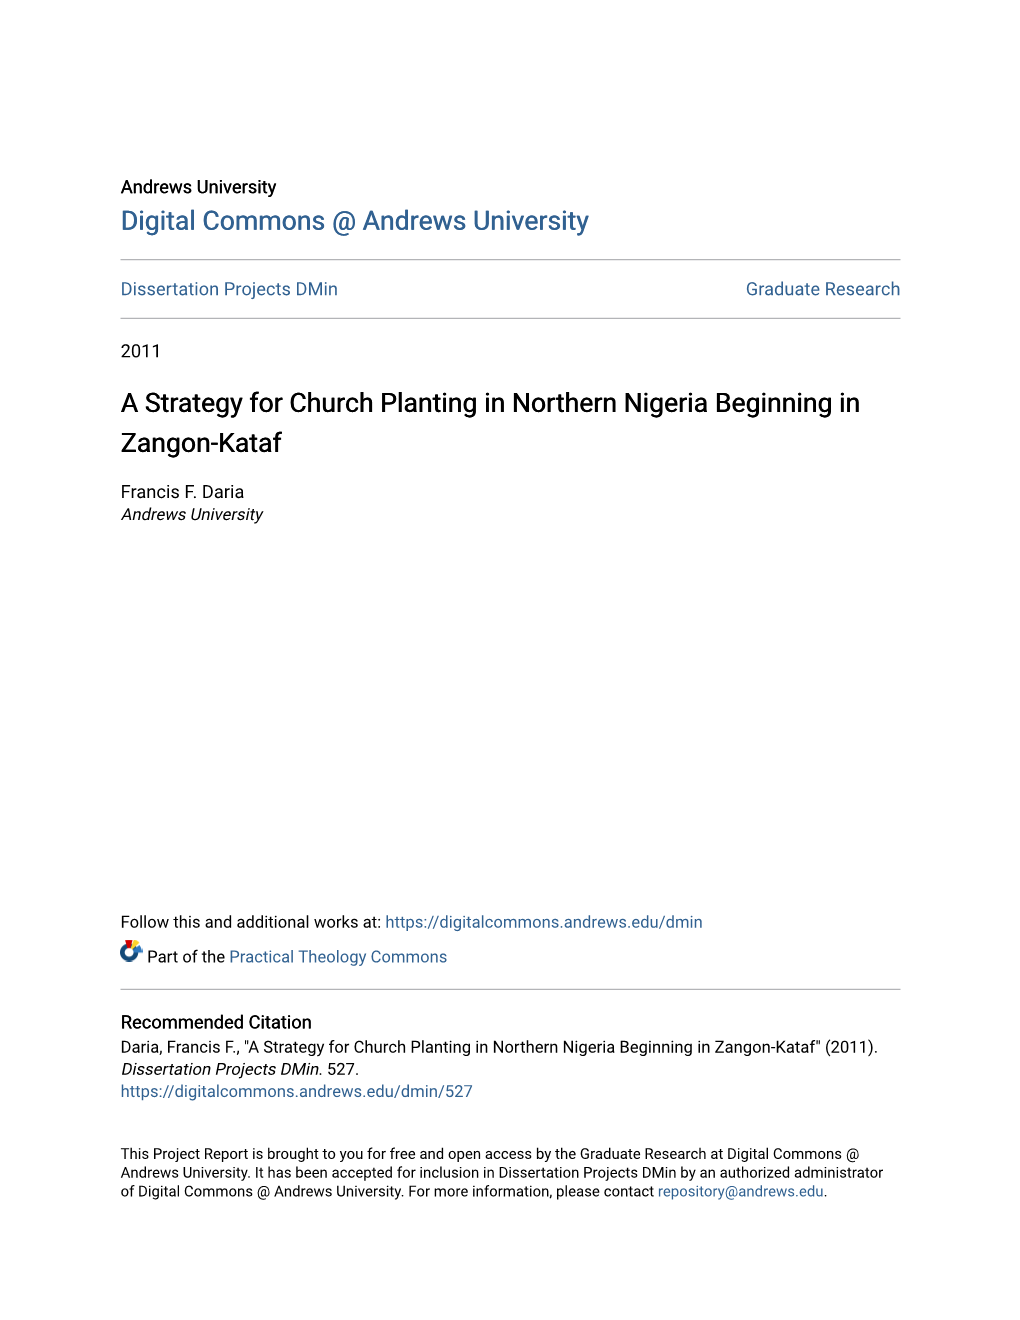 A Strategy for Church Planting in Northern Nigeria Beginning in Zangon-Kataf